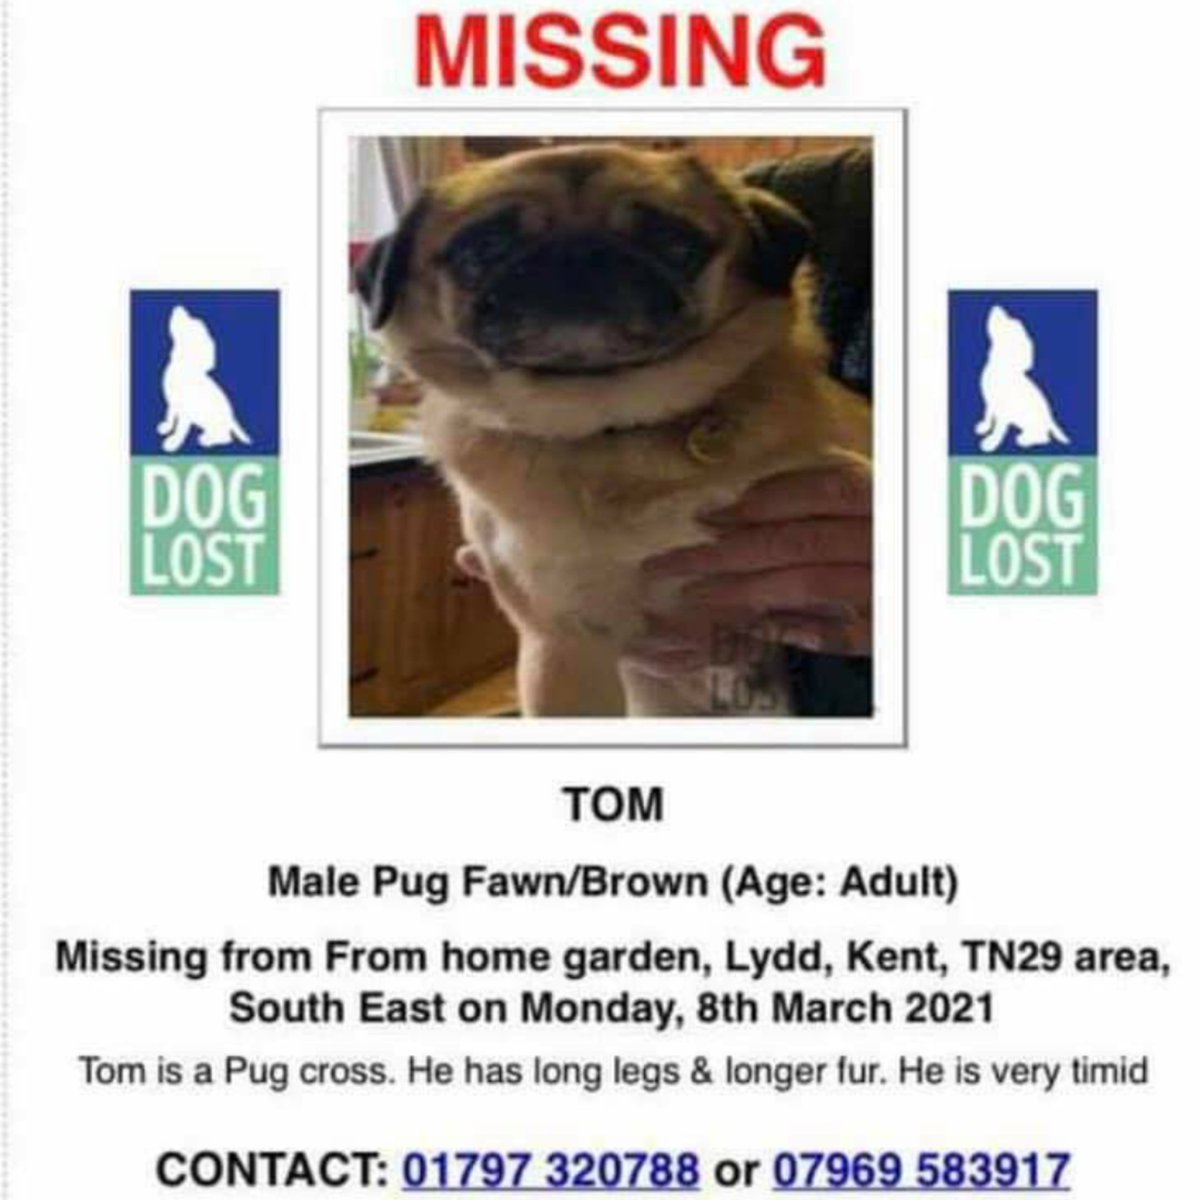 Another very difficult weekend without Tom the Pug, how could someone hurt an elderly lady so much? Second dog gone in a month. Please, please any info, let us know or take him to a vets or police station. #findTomthePug #DogTheftCrisis #dogtheftawareness #dogstolen #dogs